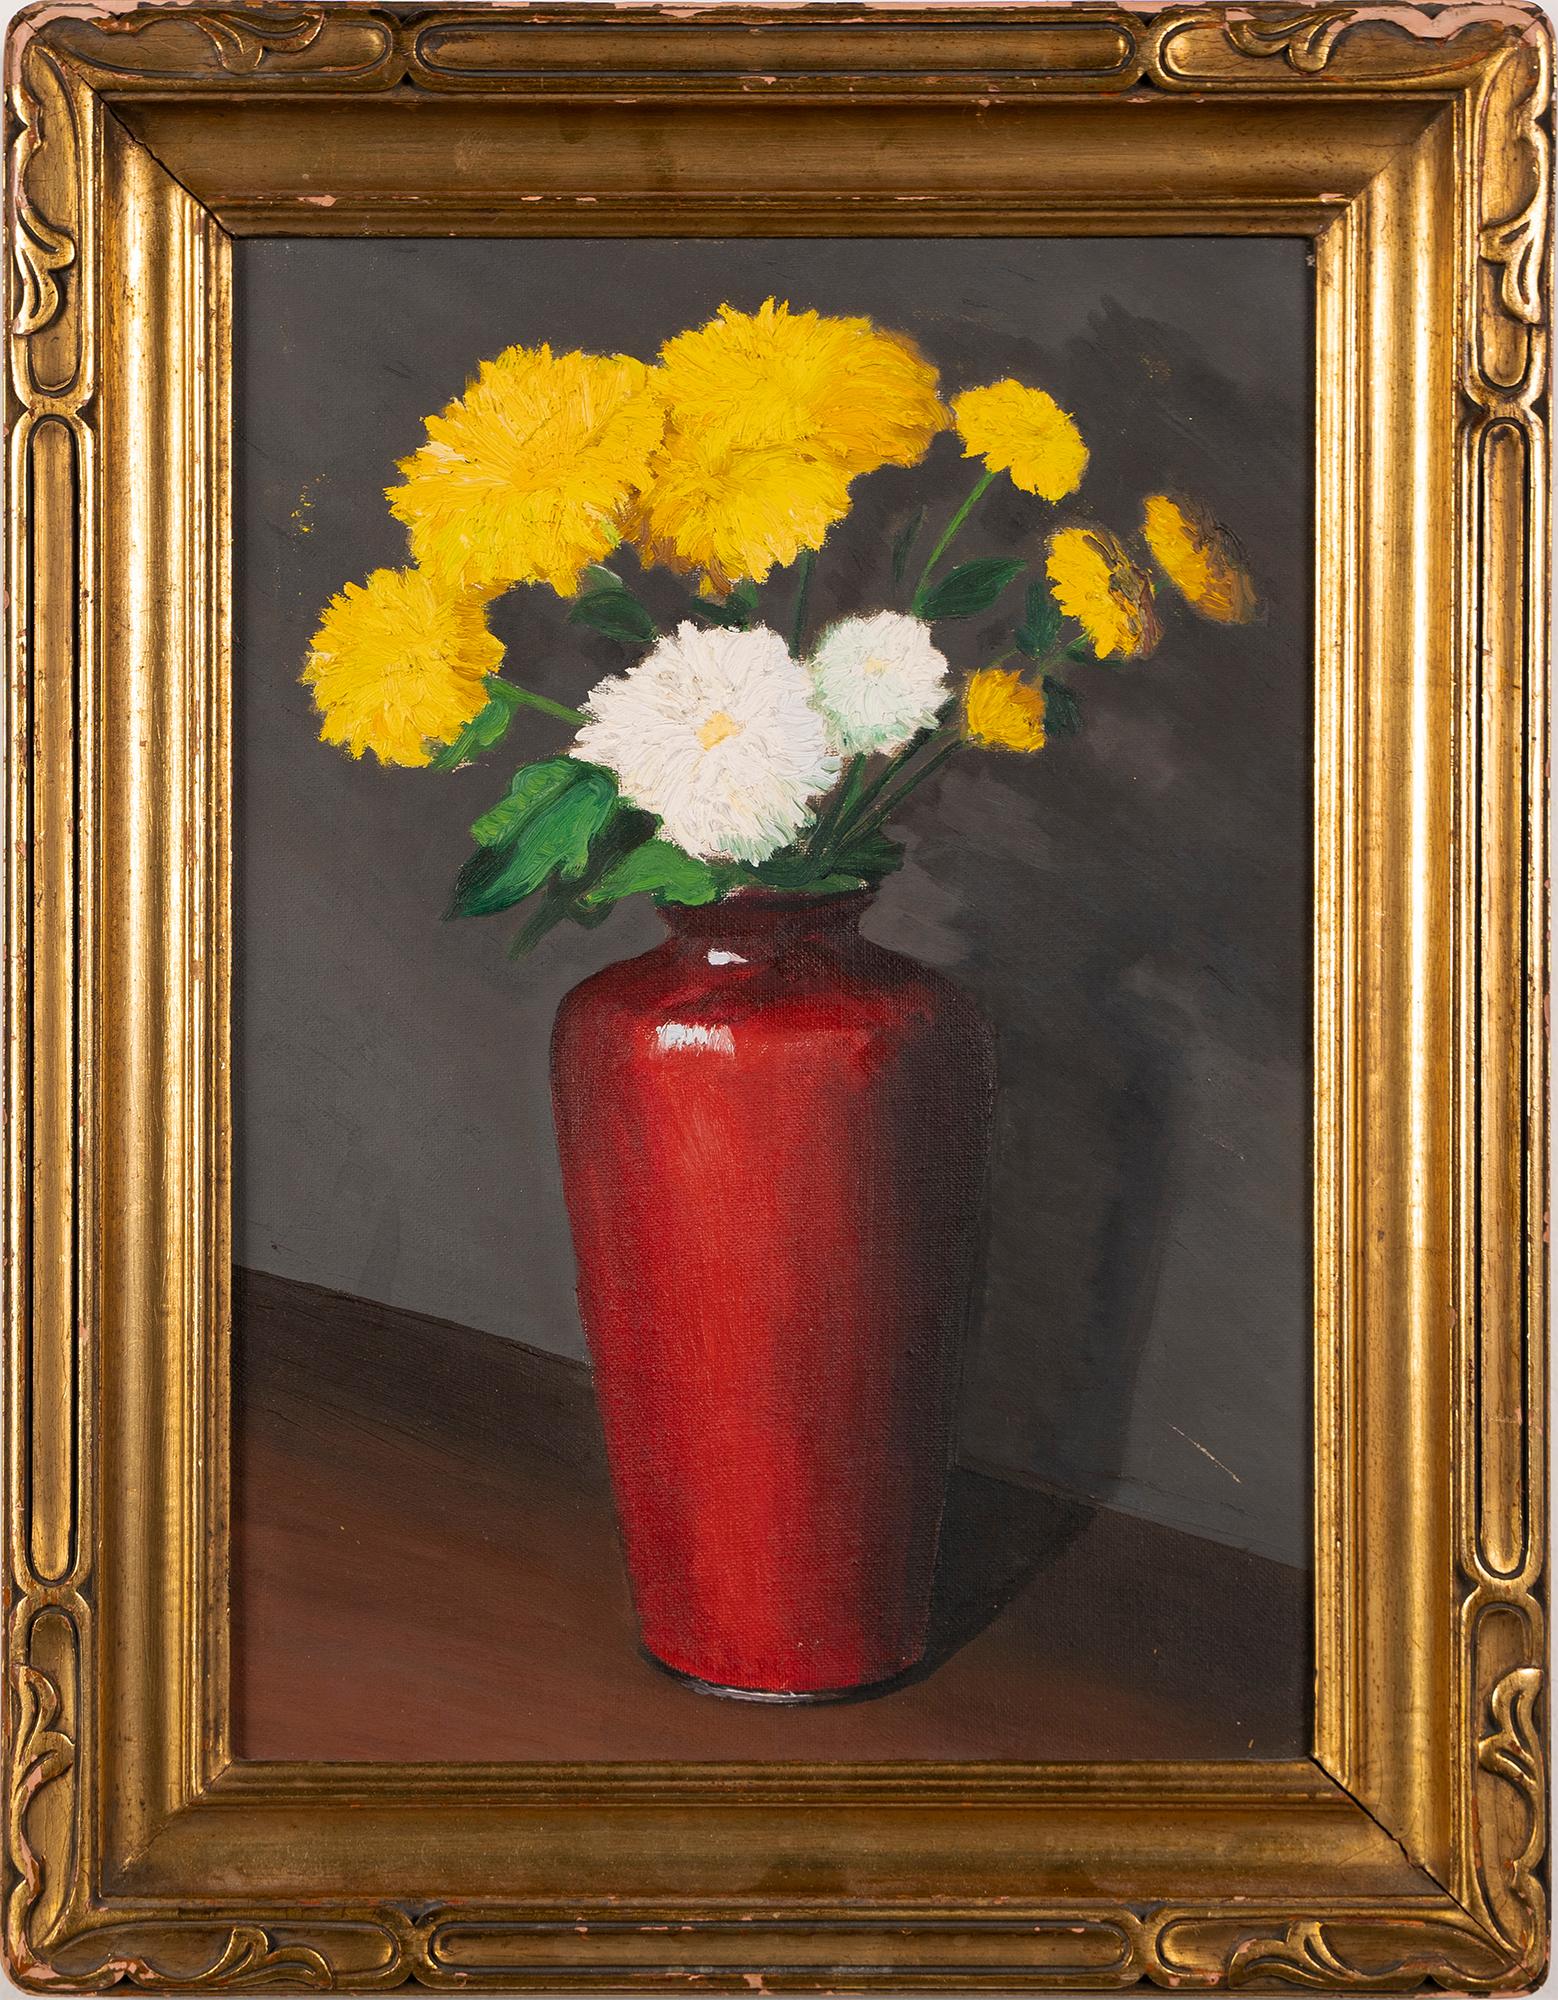 Antique American School Realist Flower Still Life Original Framed Oil Painting - Brown Interior Painting by Unknown